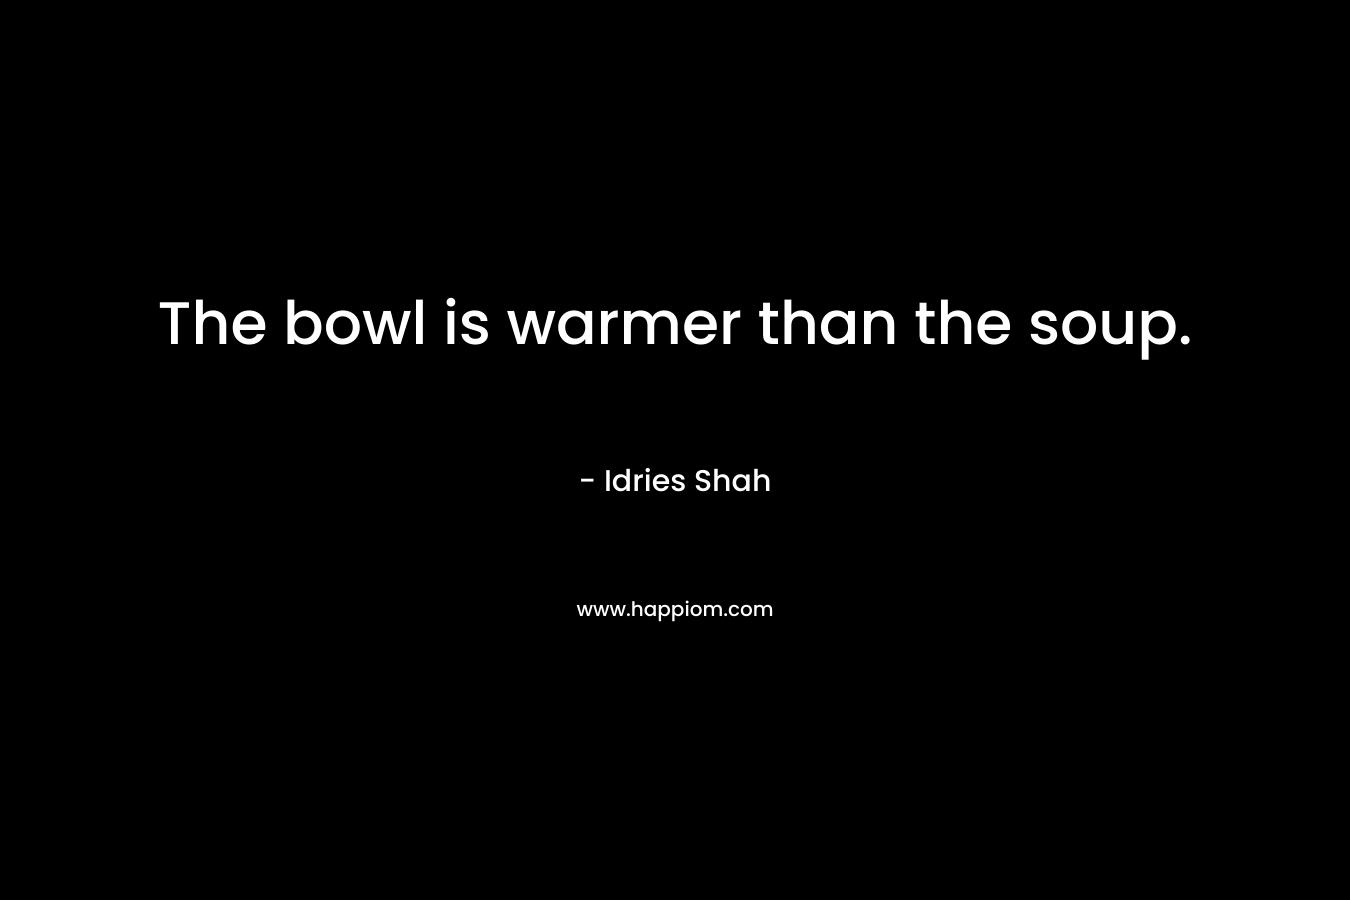 The bowl is warmer than the soup.